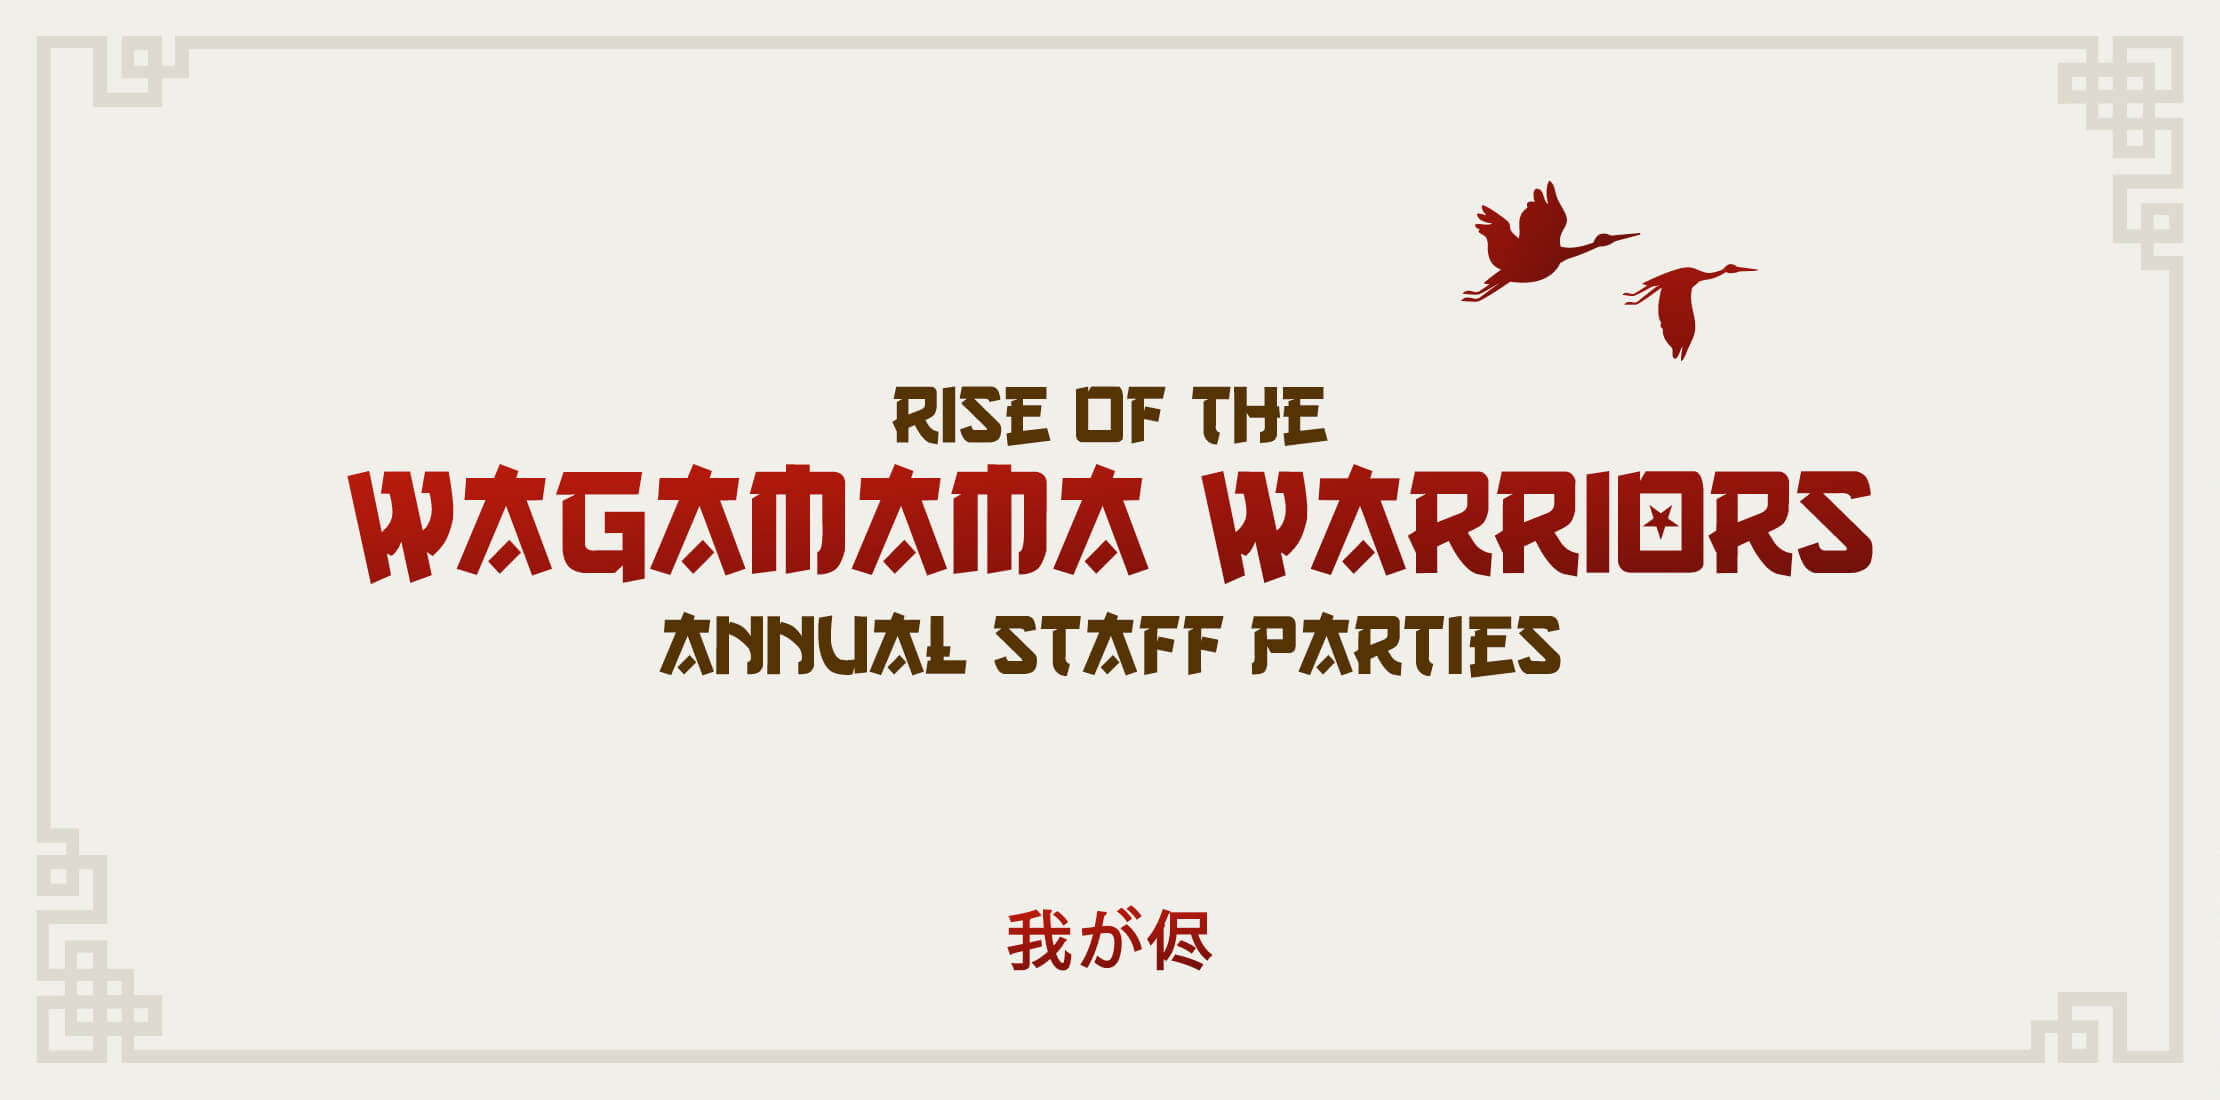 Rise of the Wagamama Warriors heading written in an oriental font, coloured brown and red, and centred on a light sand background with decorative border